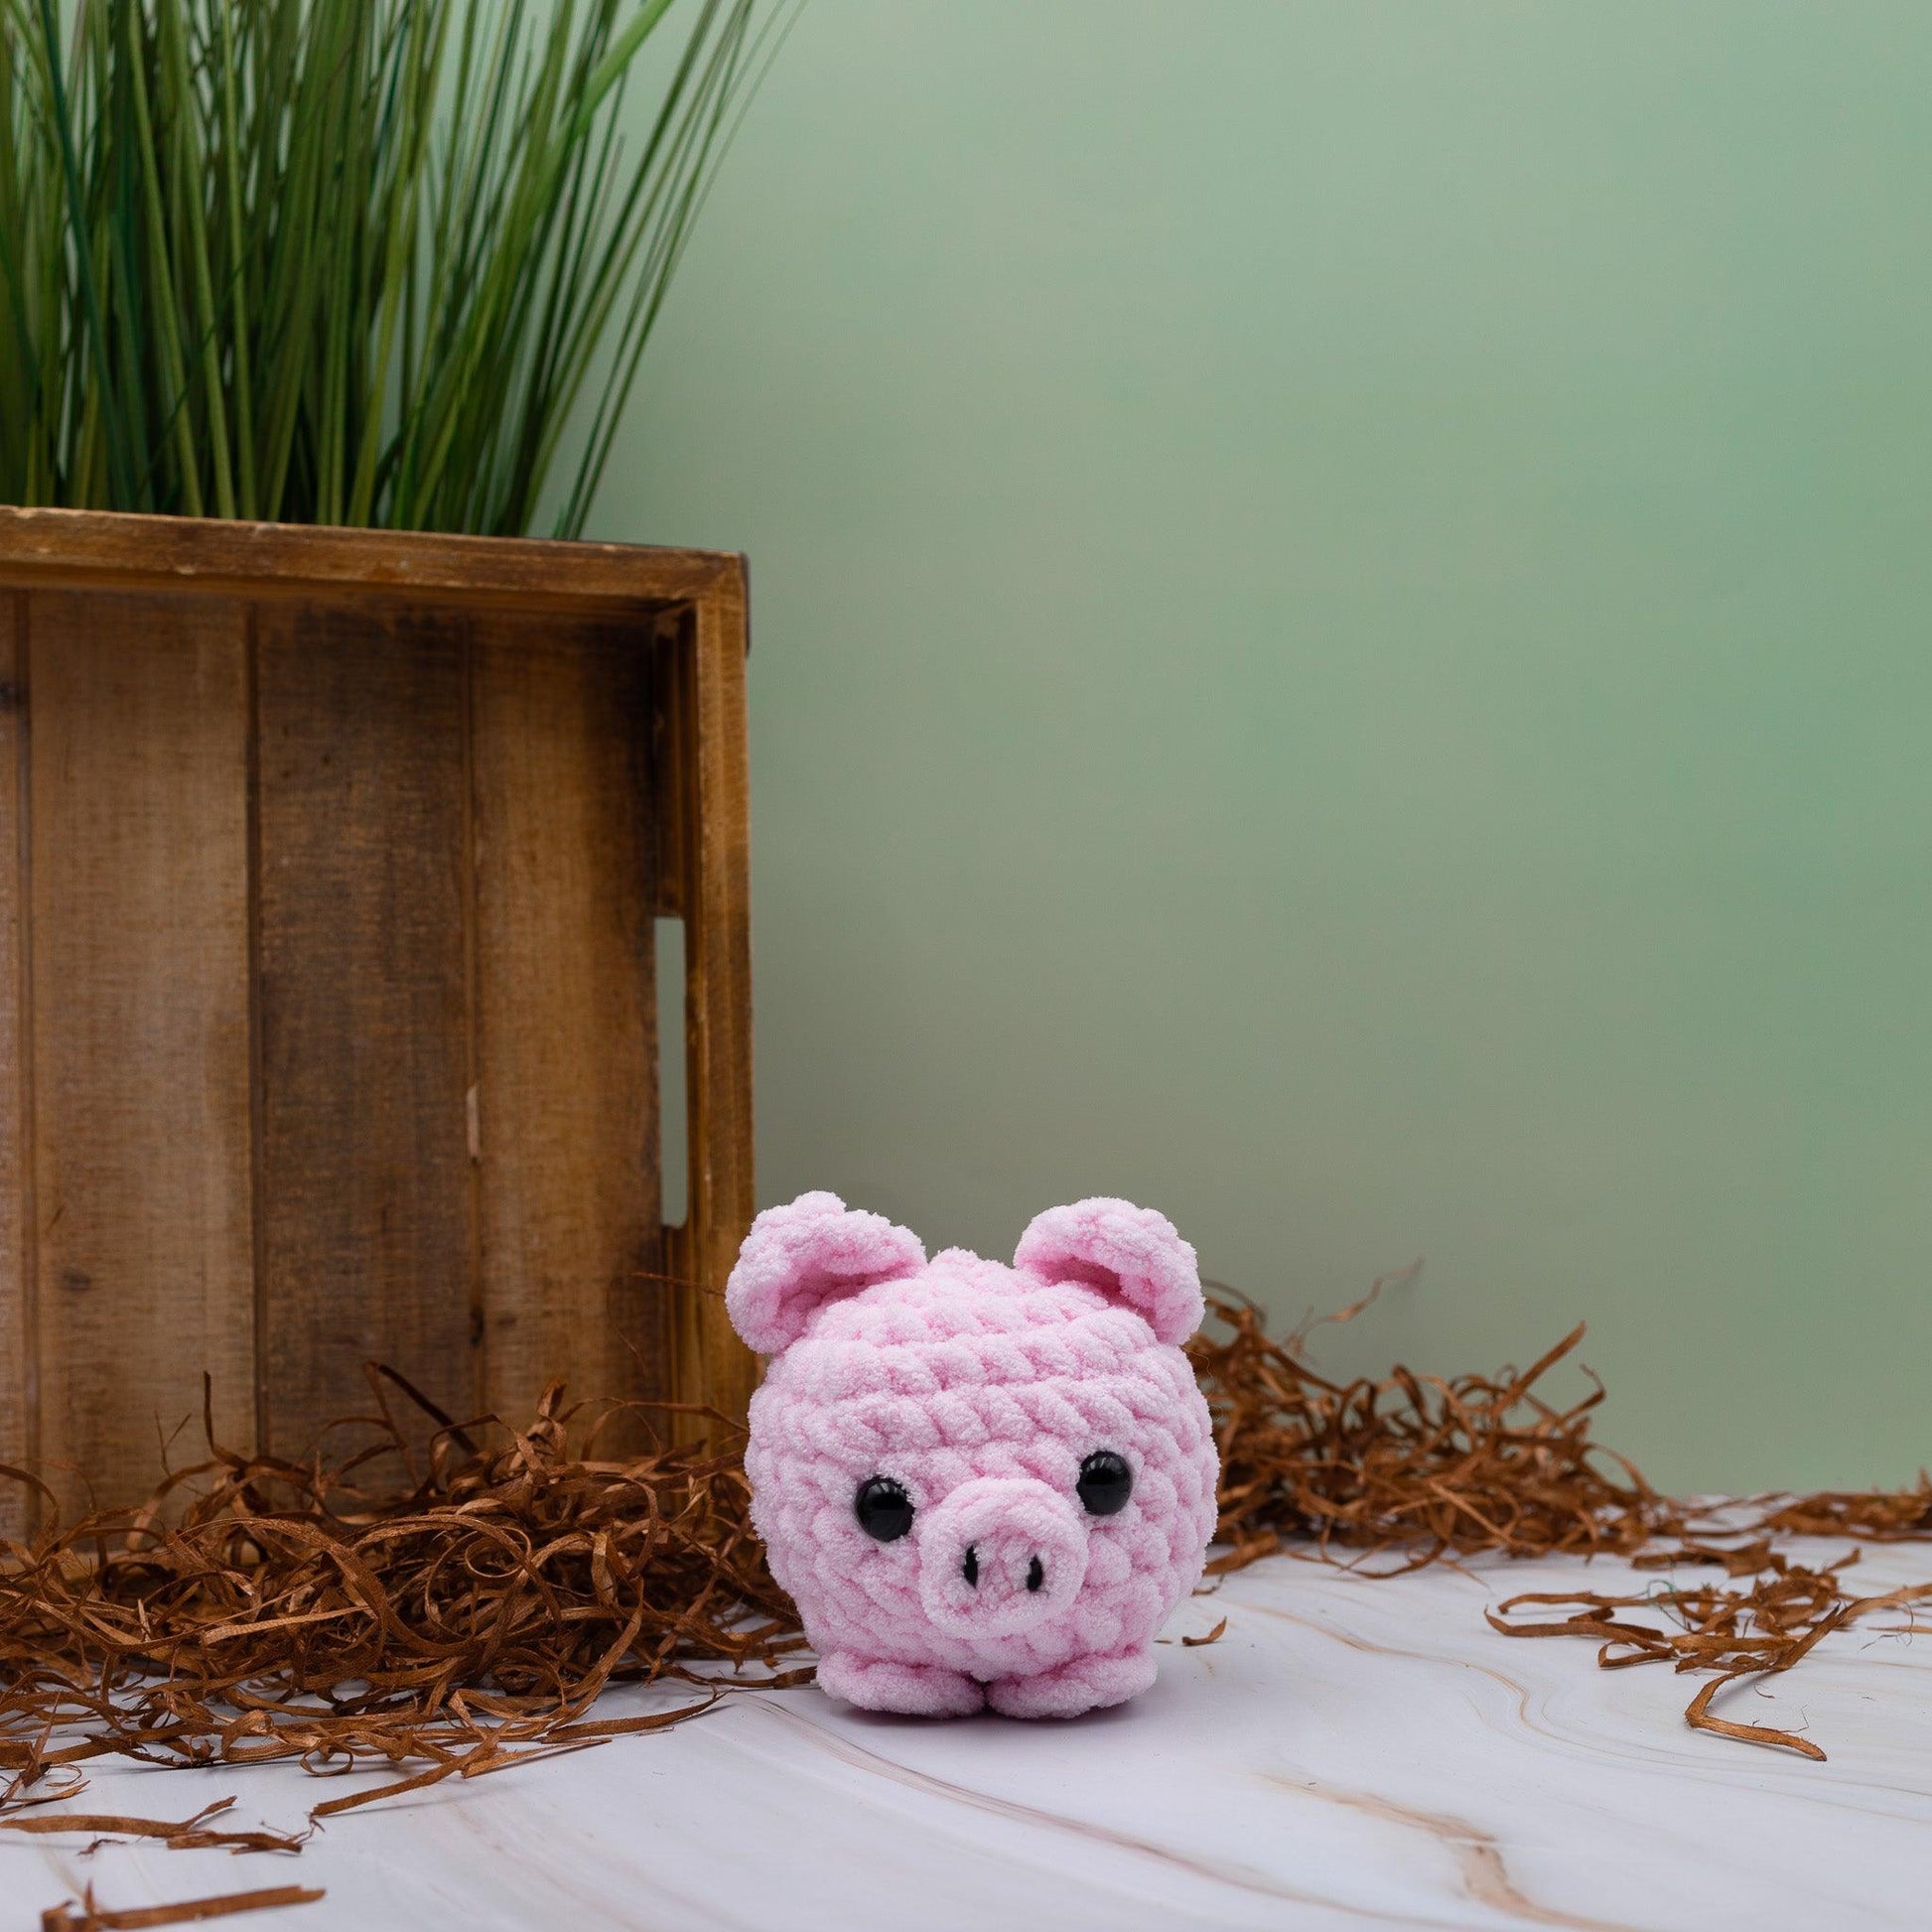 4Stitches Designs 6 Inch Crochet Mini Pig Plush Toy - Hand-Made Stuffed Animal Gift for Kids